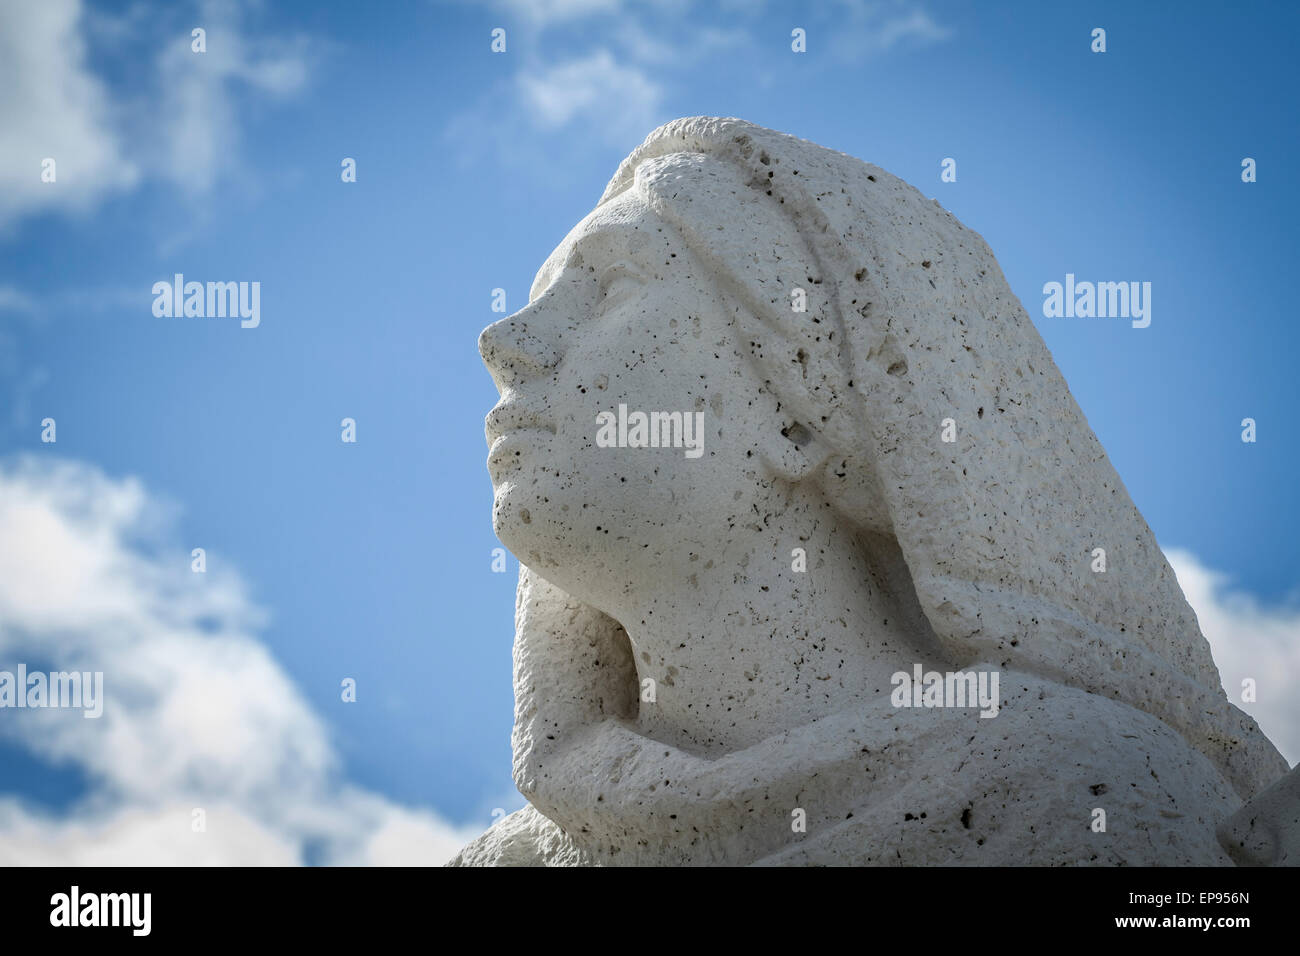 sculpture of a woman praying.Cerro de los Angeles is located in the municipality of Getafe, Madrid. It is considered the geograp Stock Photo